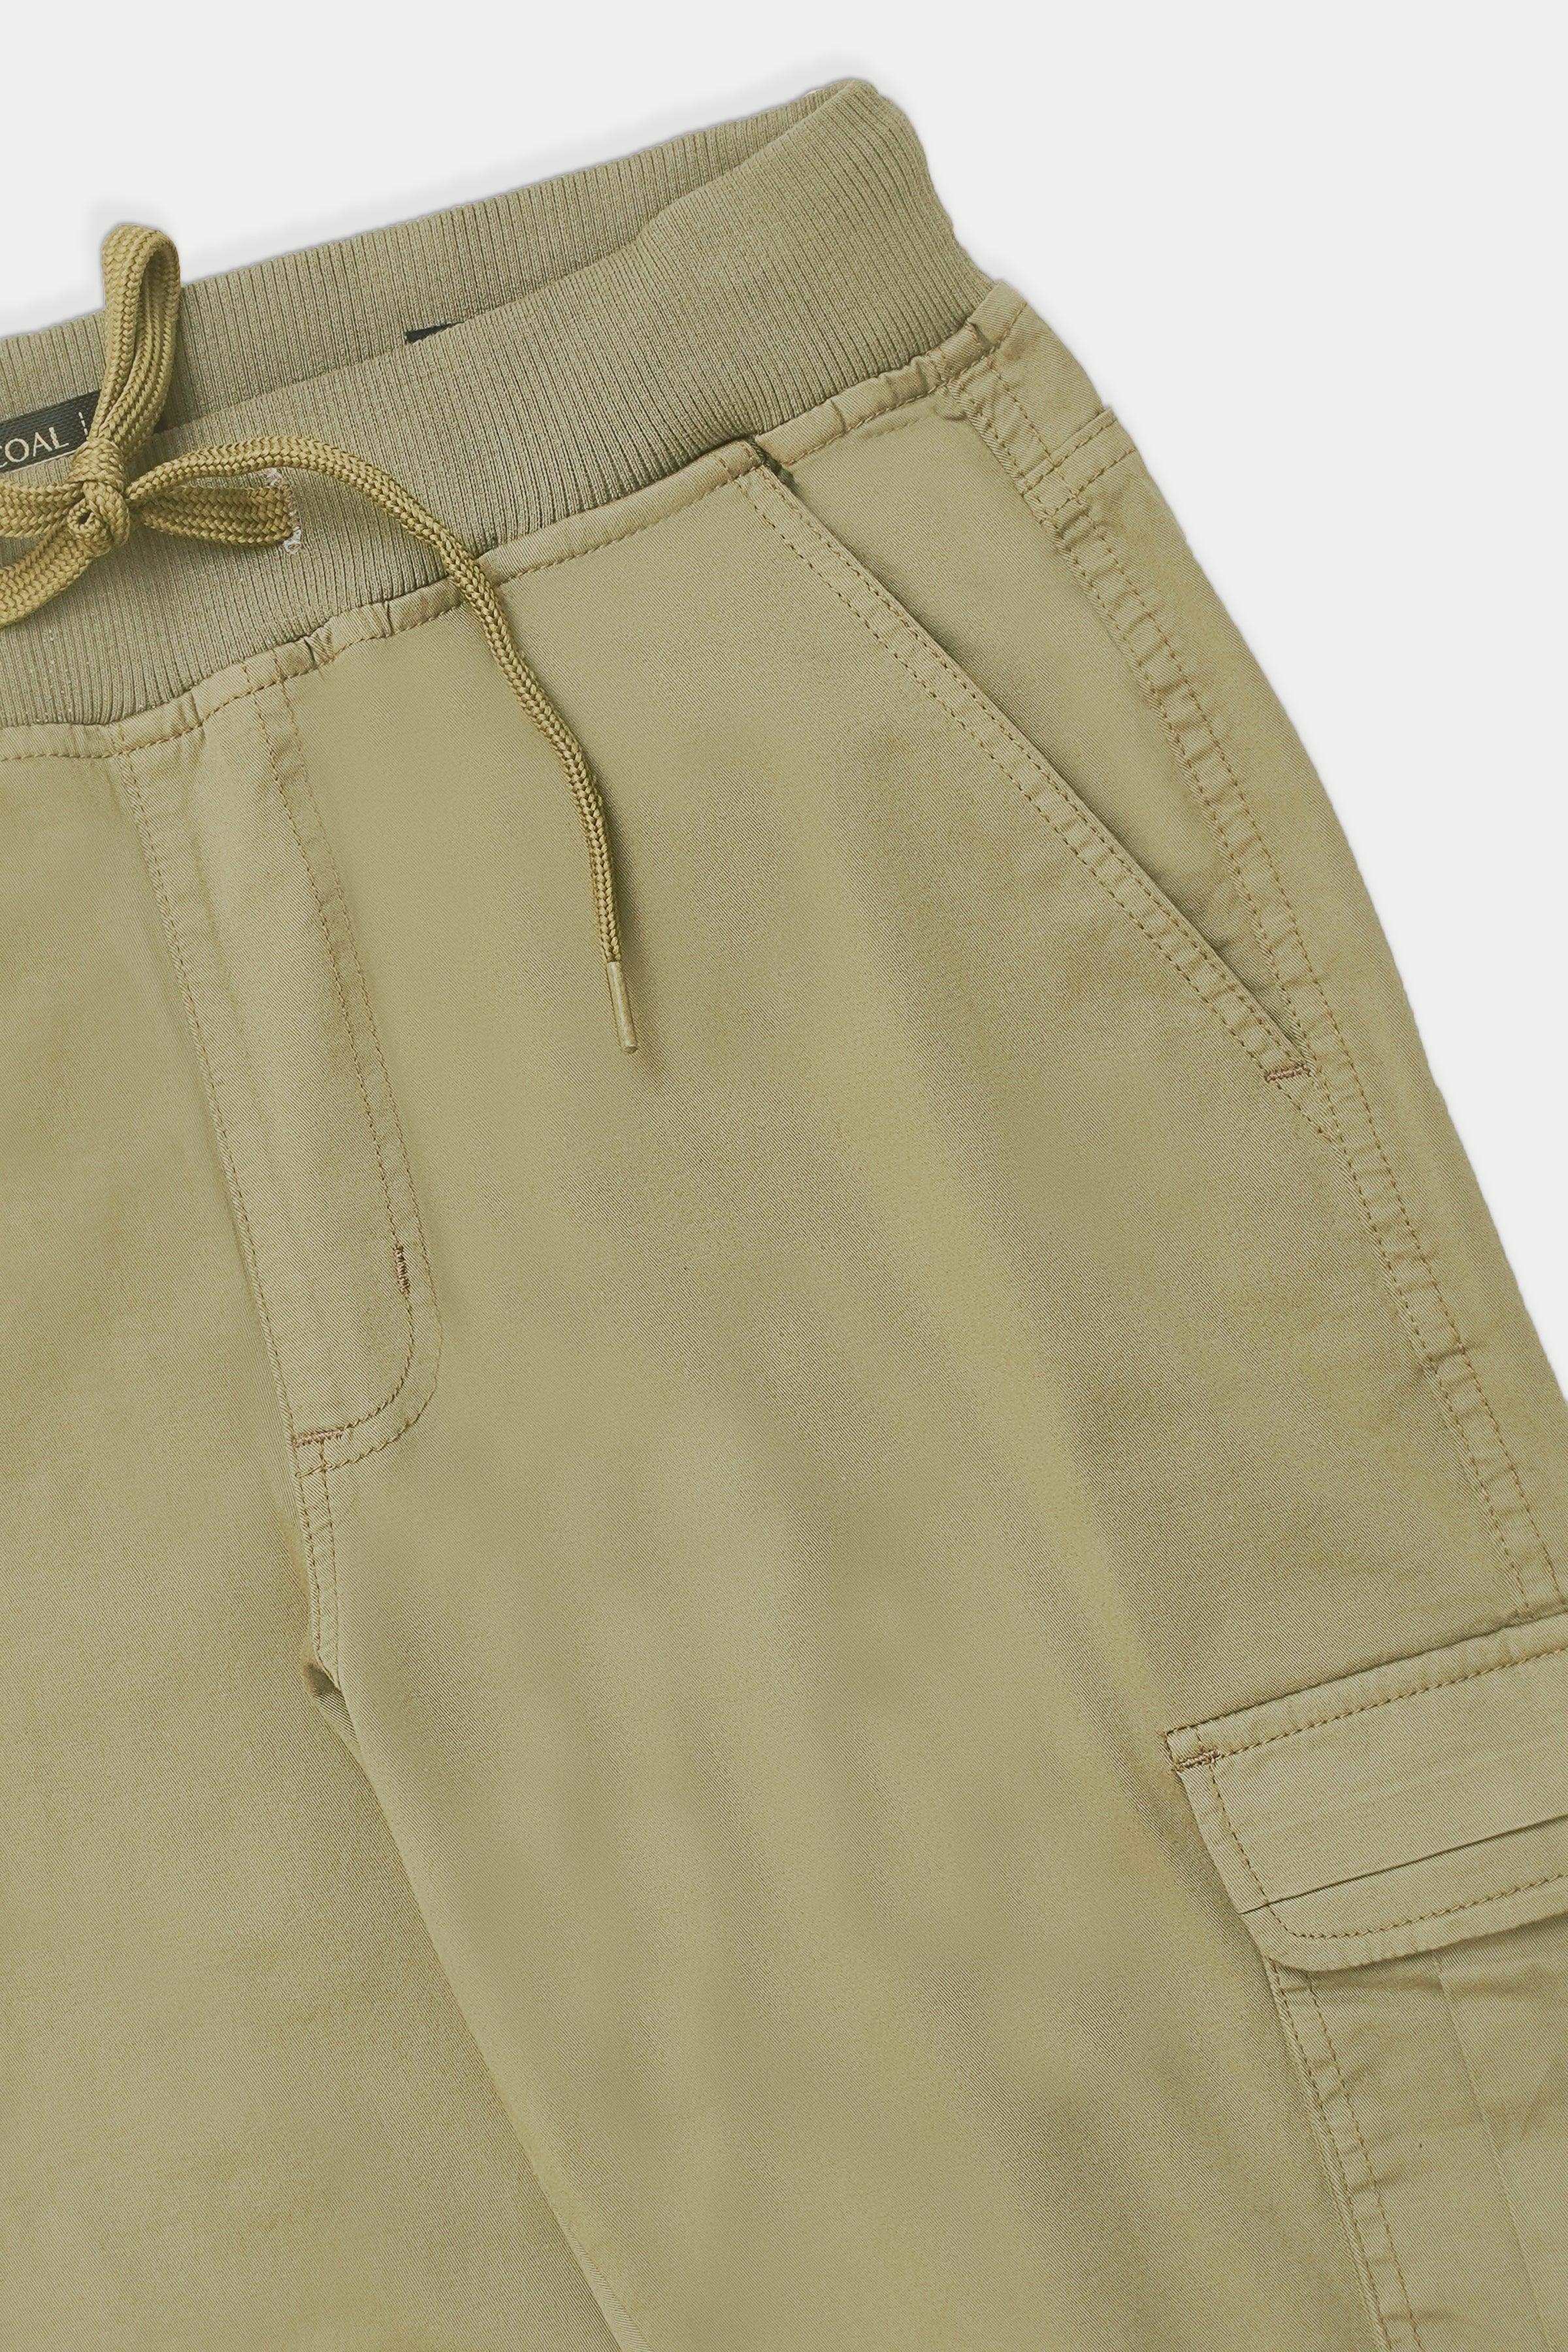 CARGO JOGGER SLIMFIT LIGHT OLIVE TROUSER at Charcoal Clothing